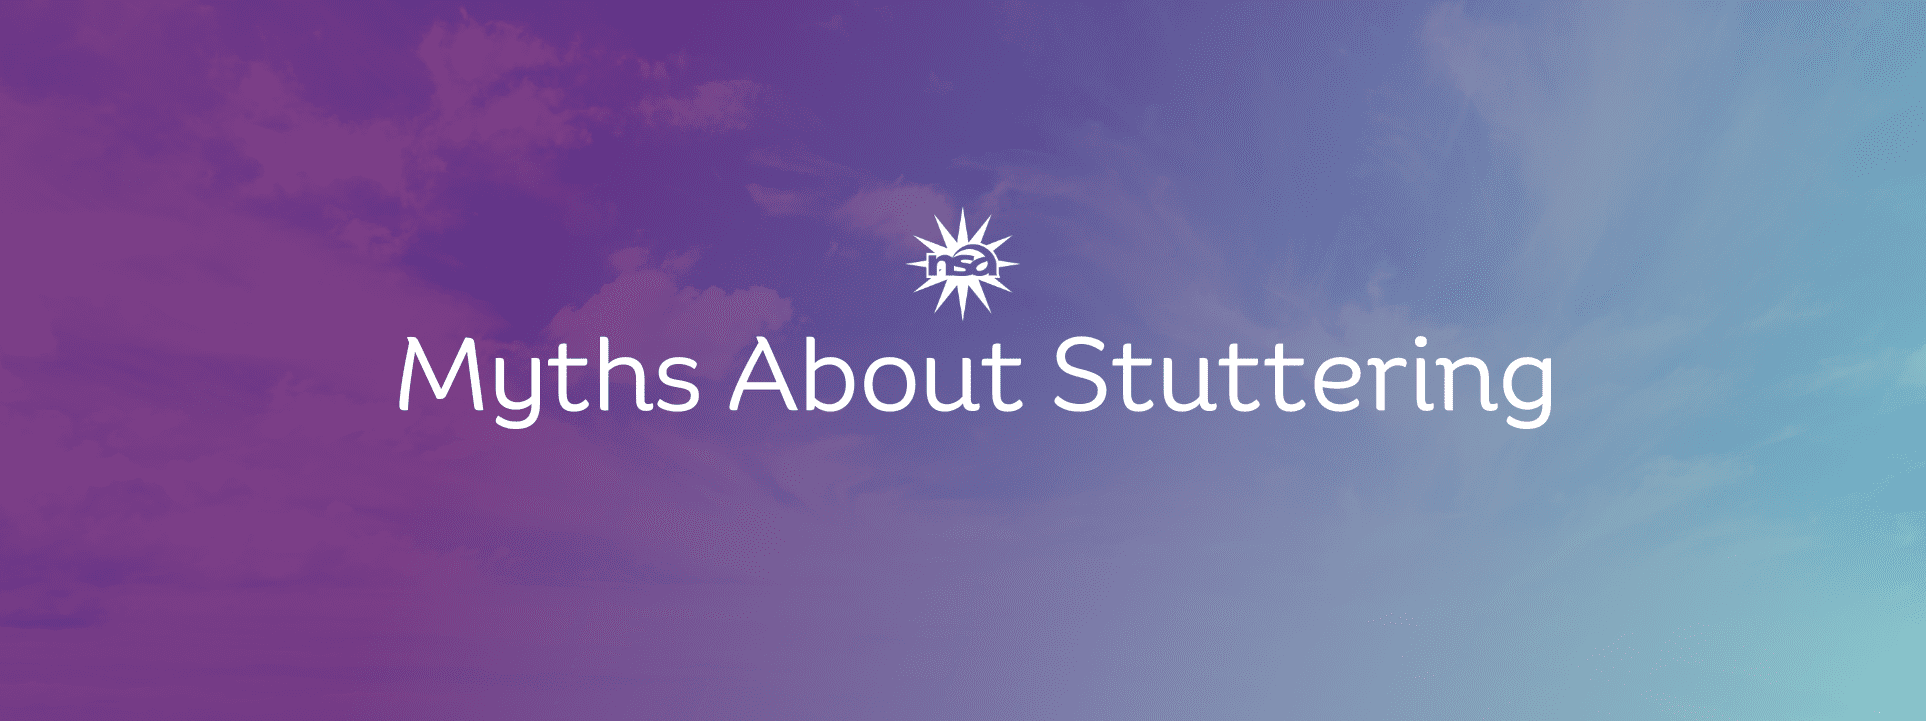 myths about stuttering banner